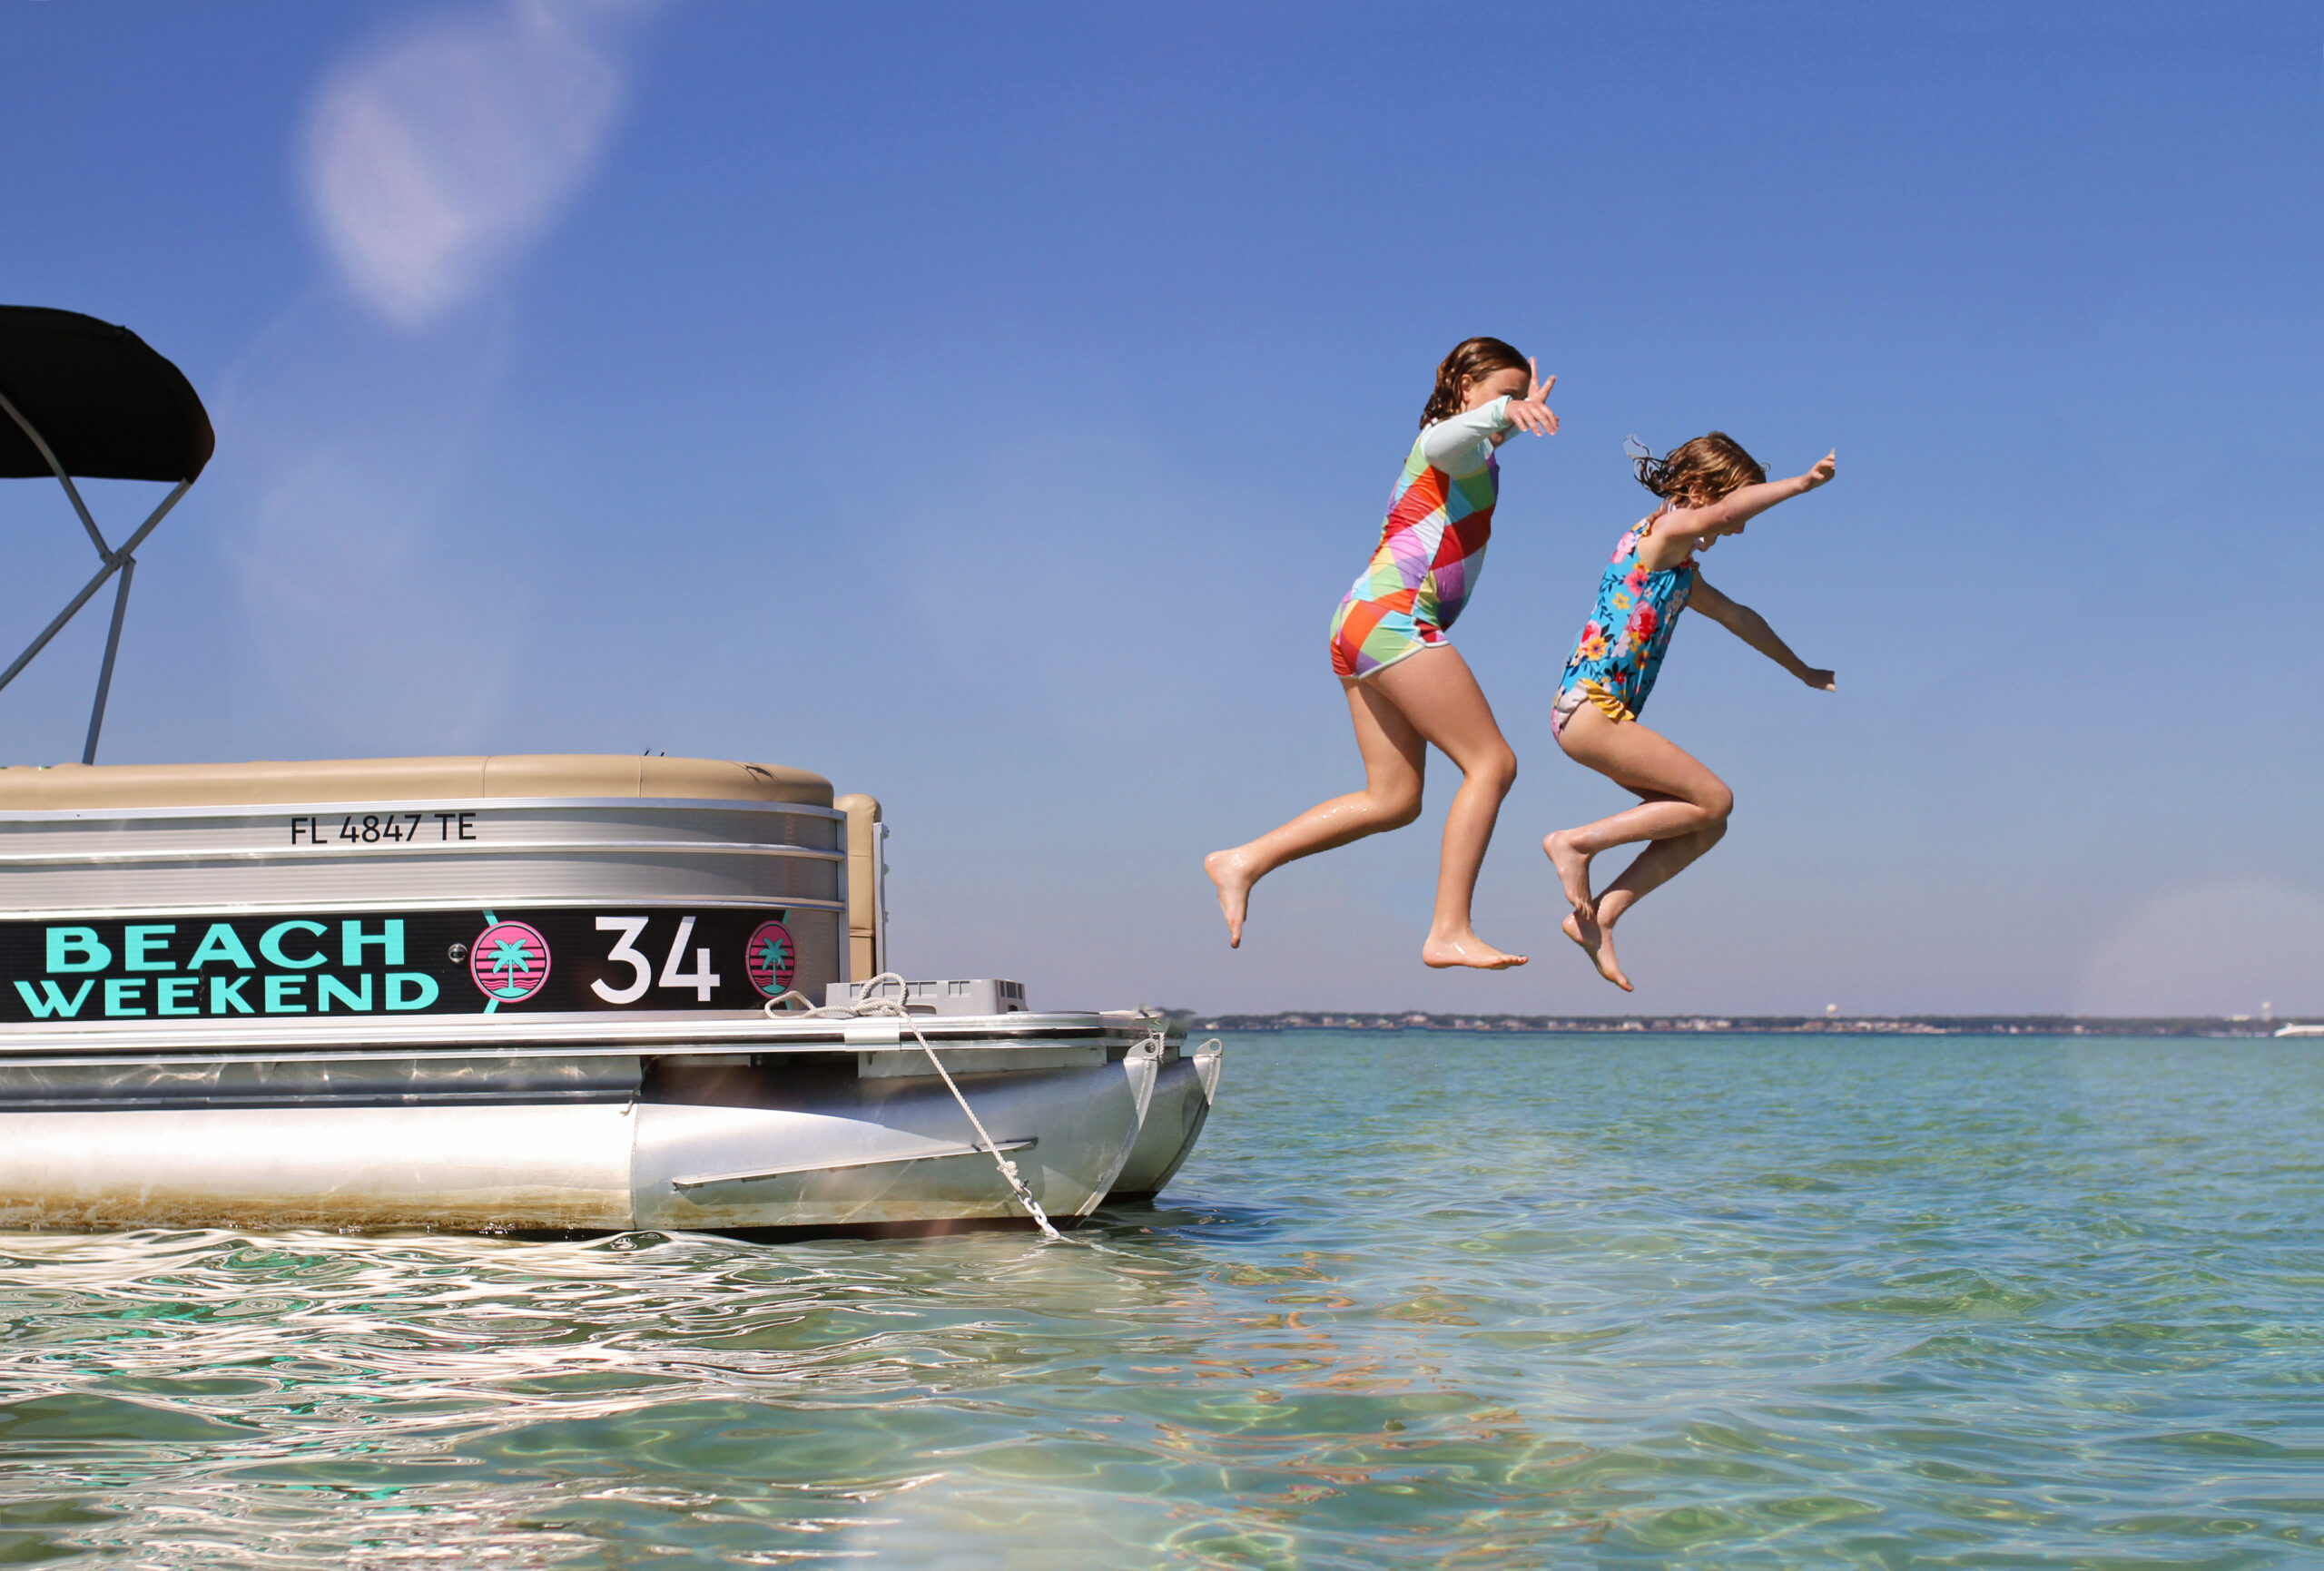 Two kids jumping into water from a pontoon boat